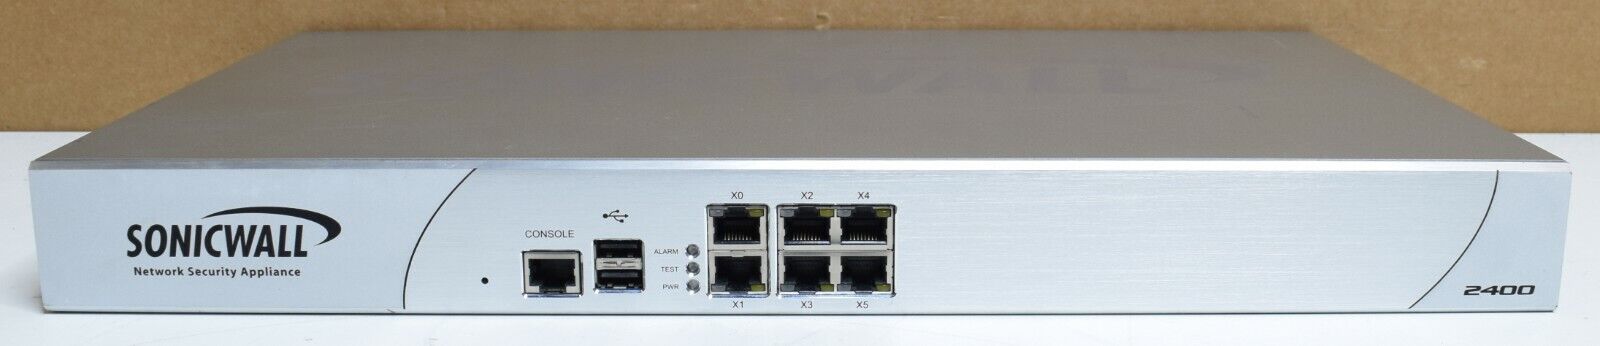 SonicWALL 2400 1RK25-084 Network Security Appliance Firewall | Tested/Fac.Reset